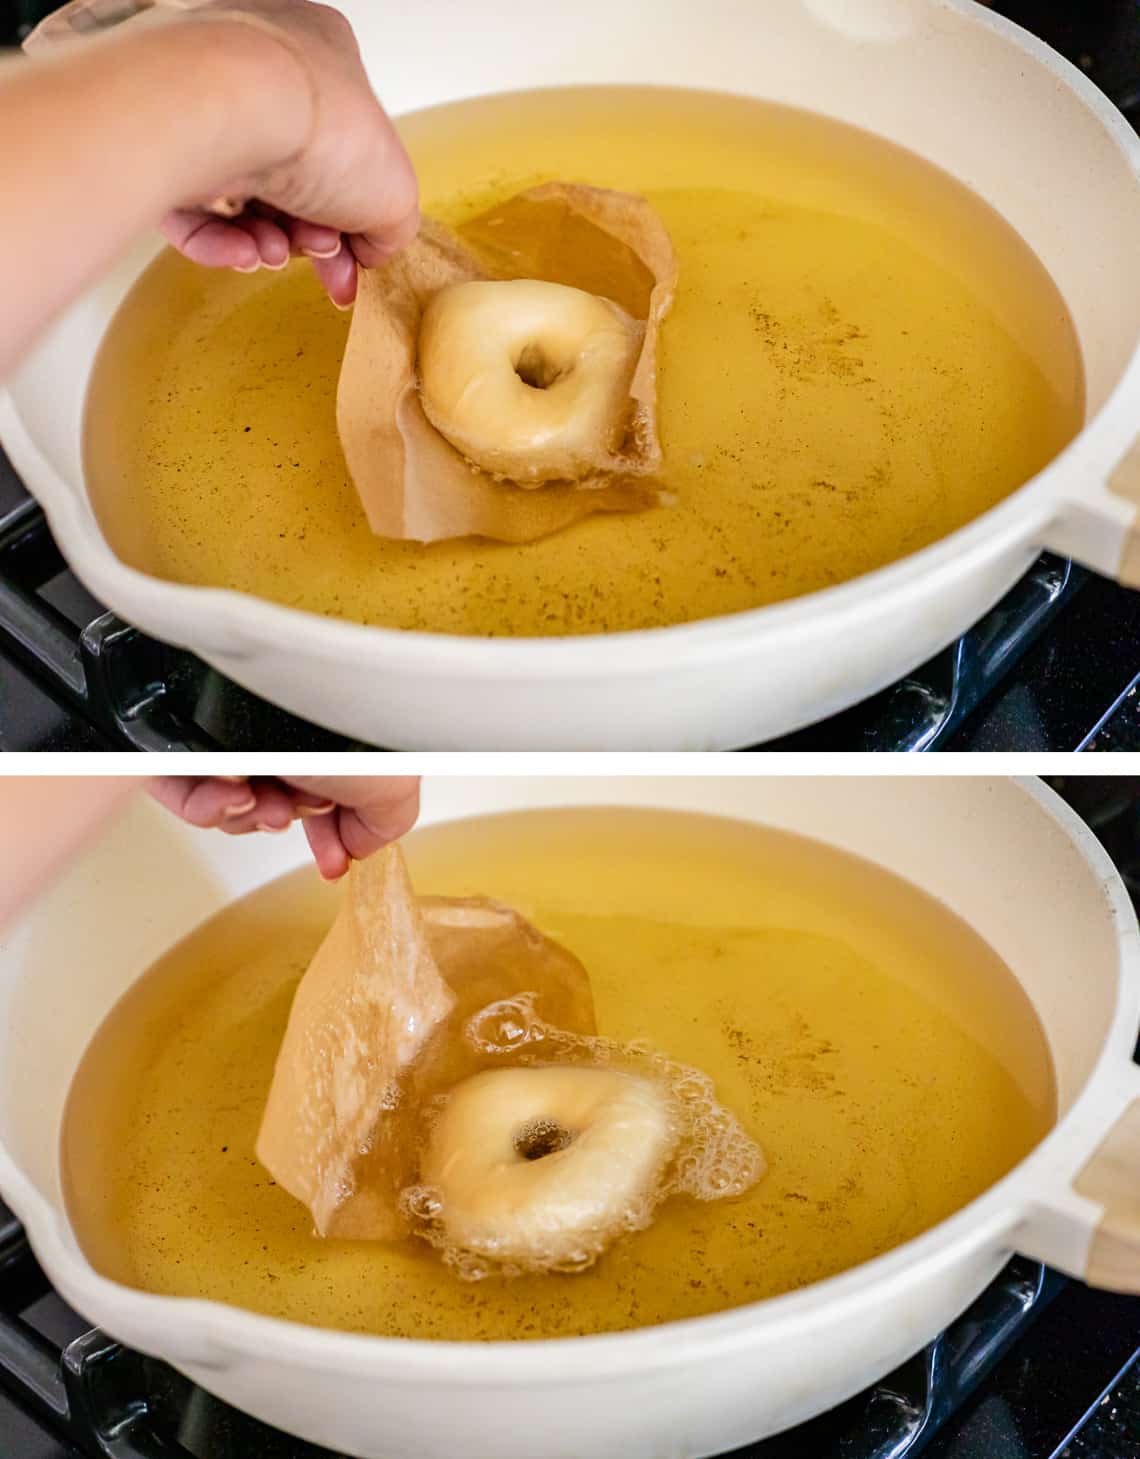 holding the paper with the donut on it submerged in oil, then carefully lifting just the paper out.